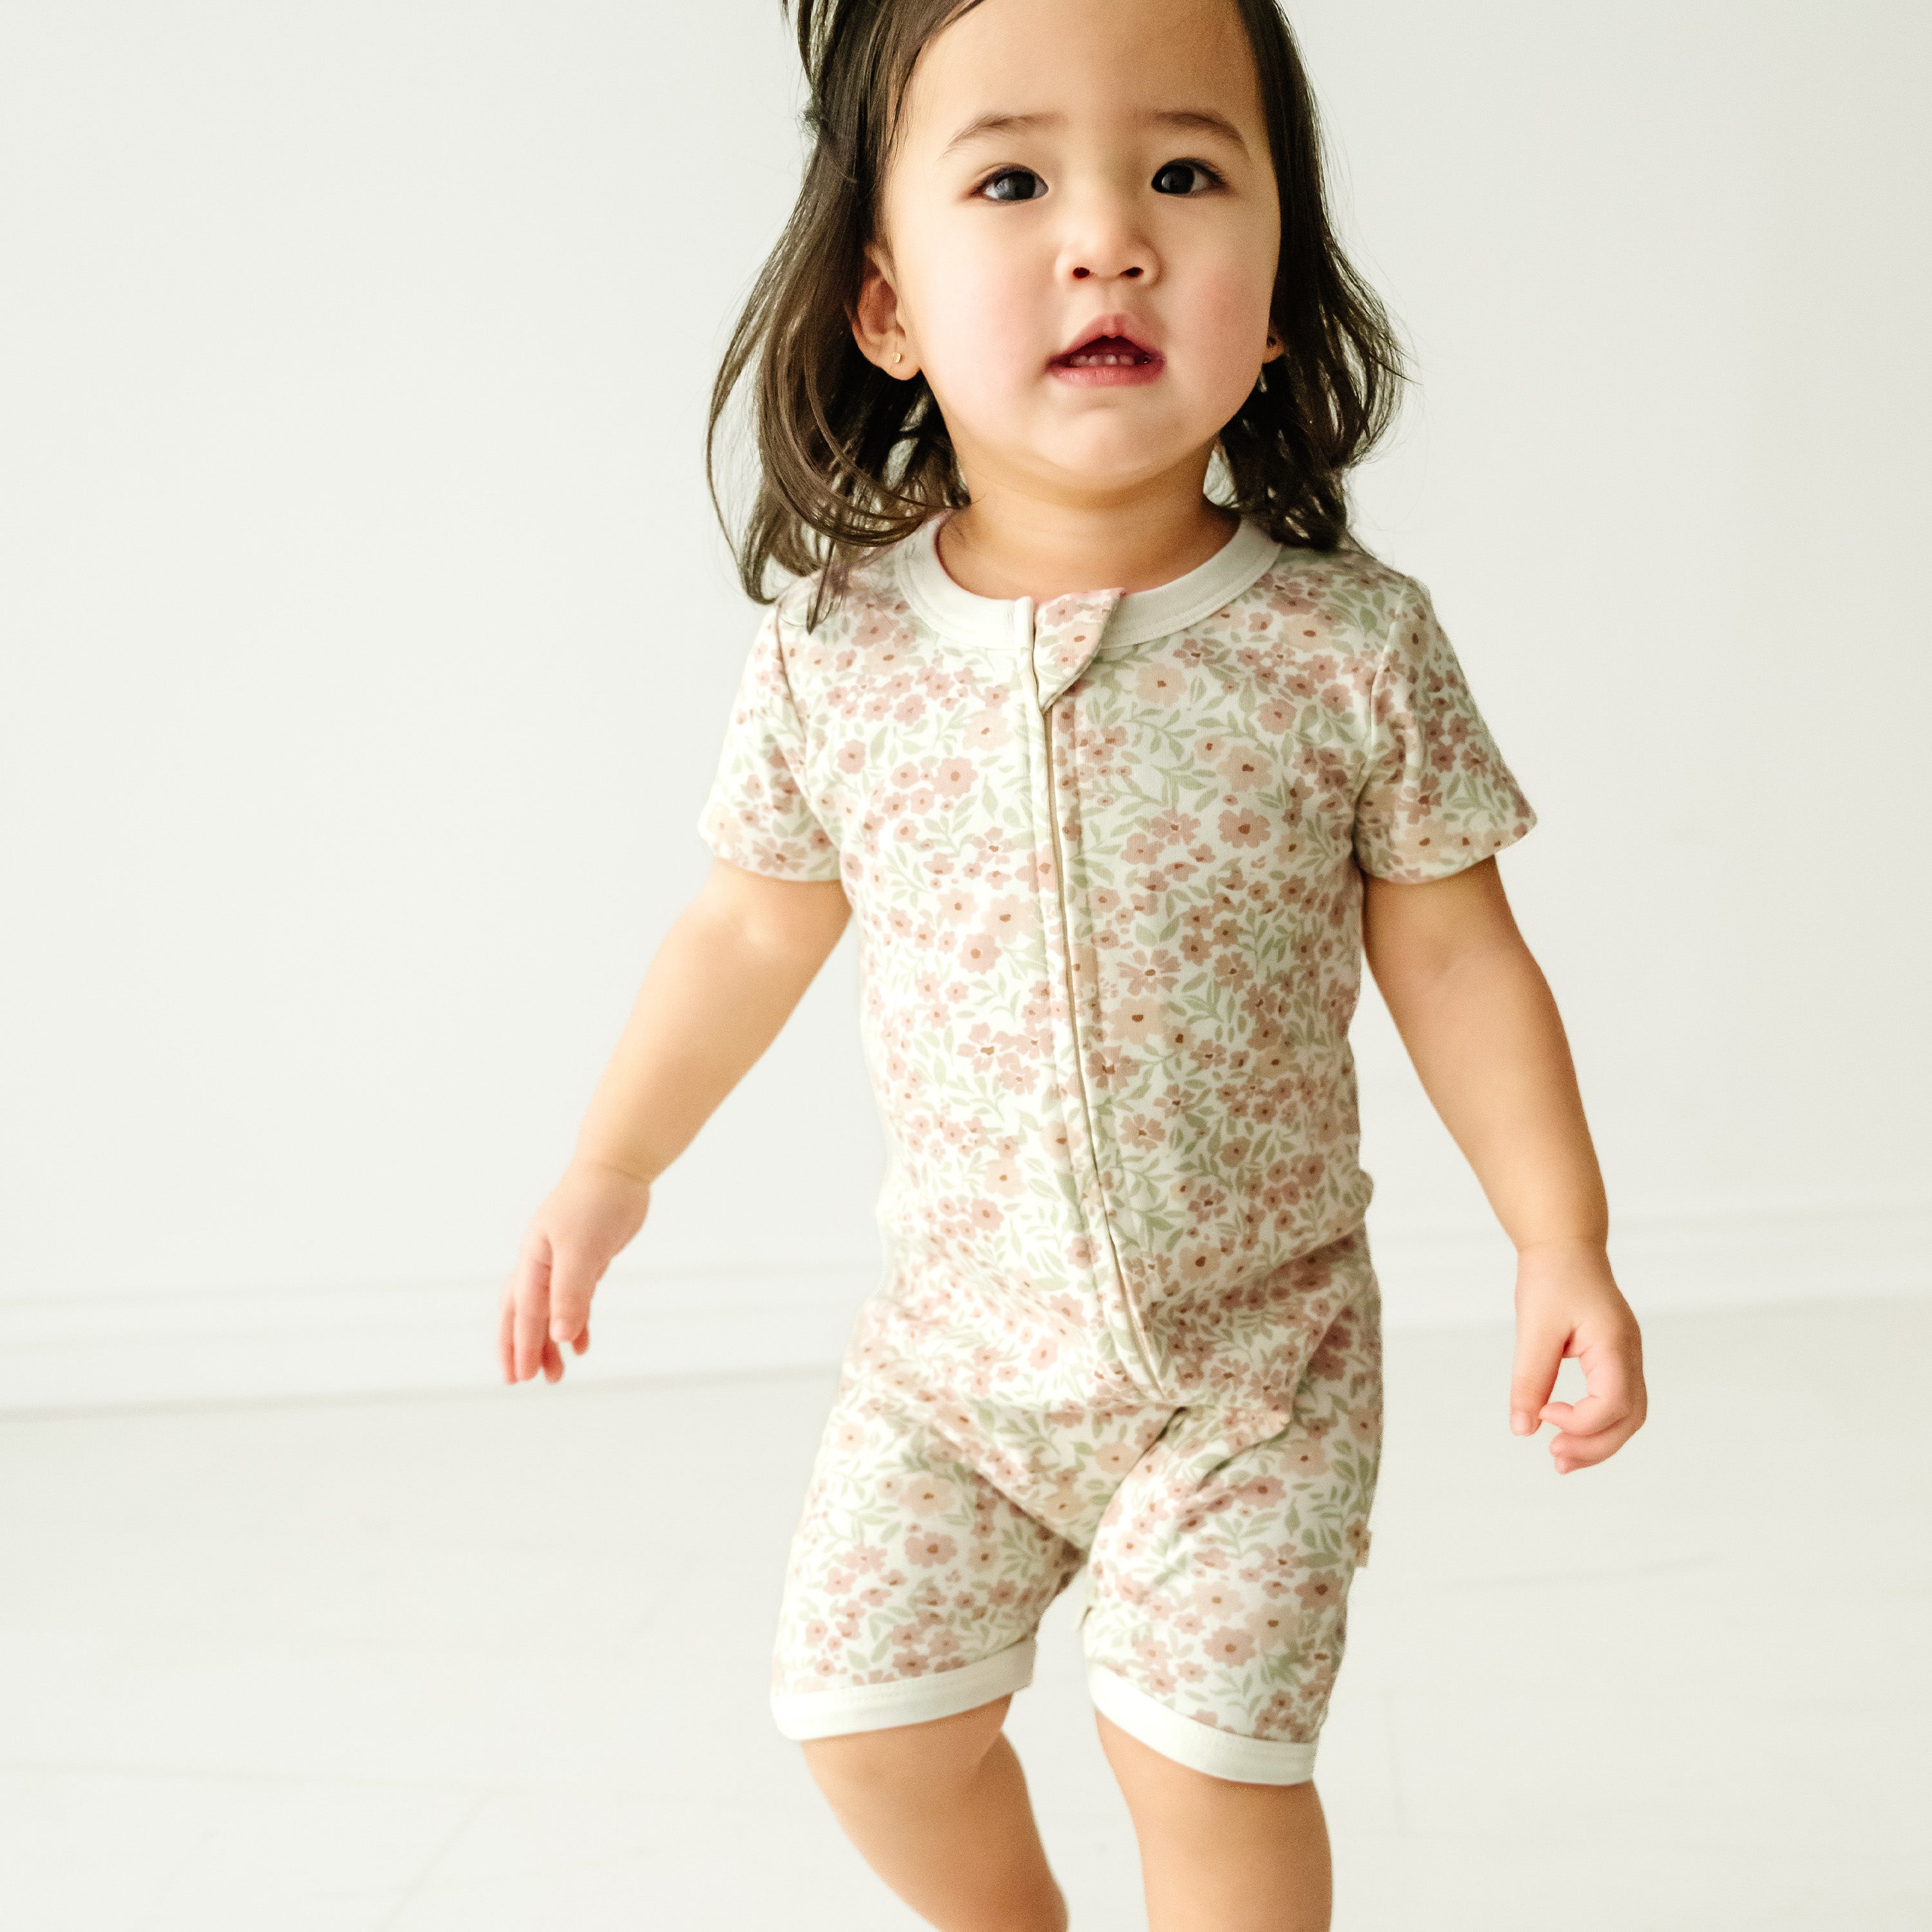 A toddler girl in a Makemake Organics Organic Short Zip Romper - Summer Floral standing in a bright room with a plain white background, looking slightly to the side with a thoughtful expression.